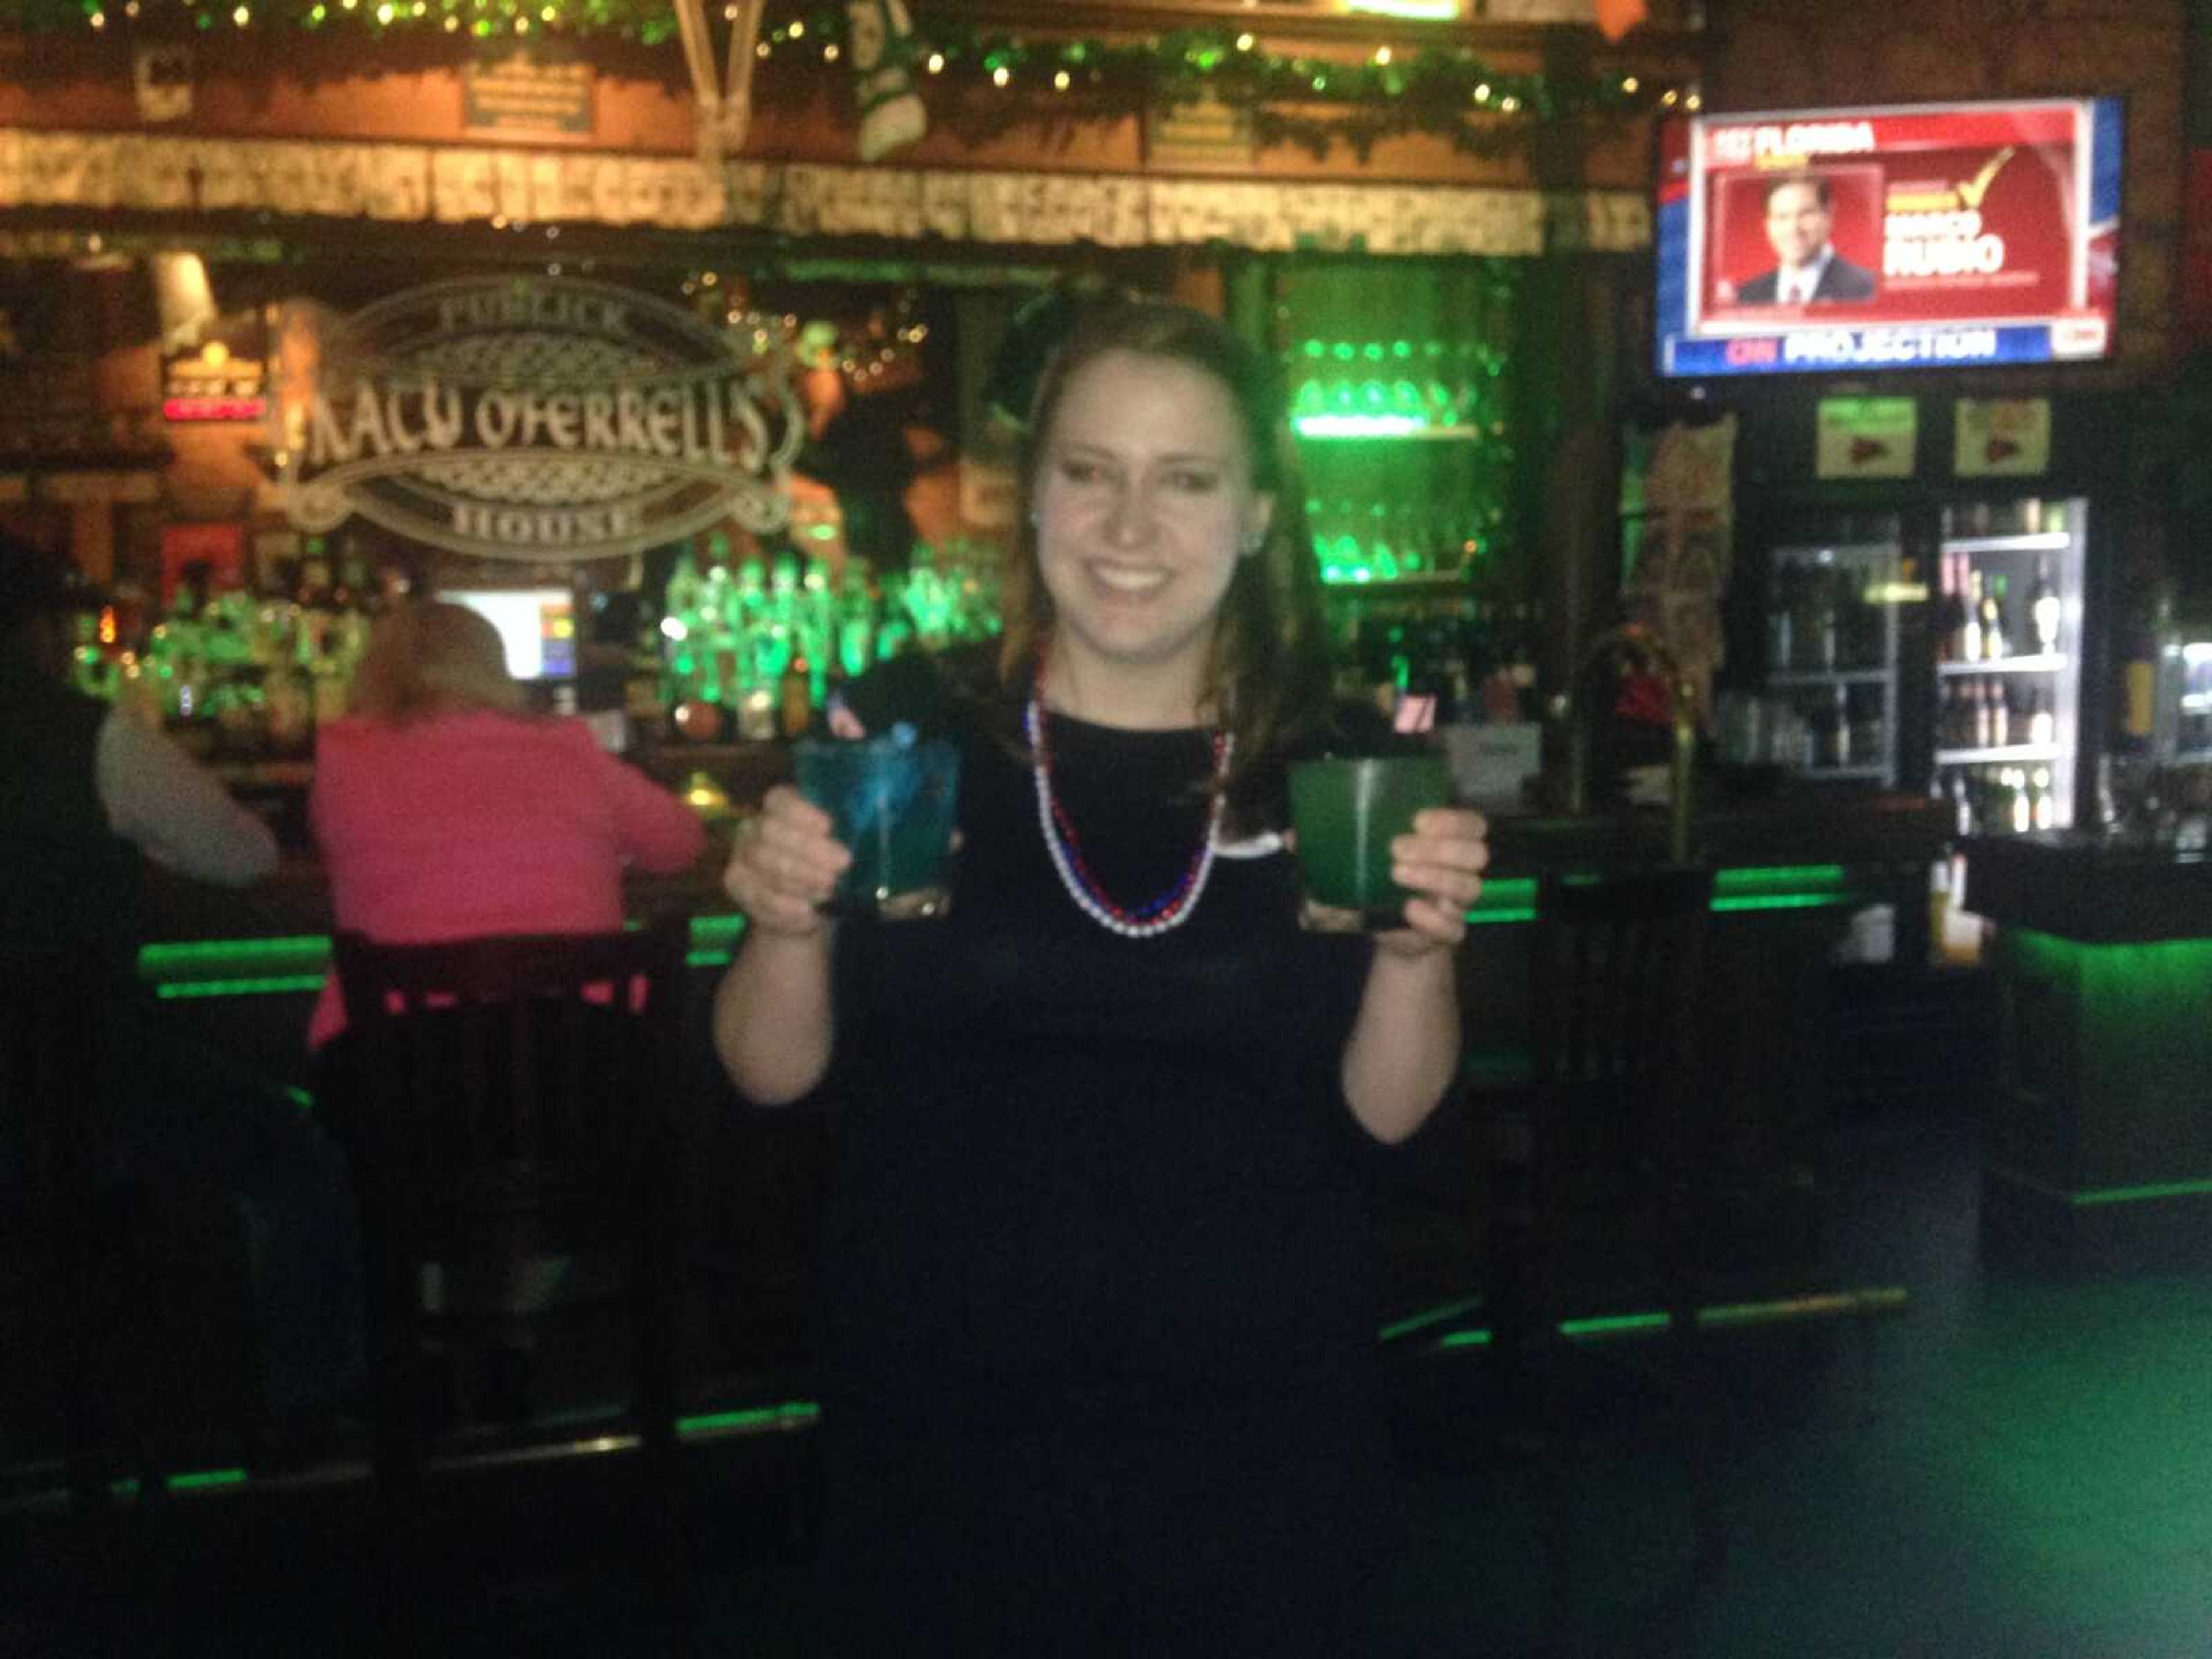 Katy O'Ferrell's hosted drink specials for election night.